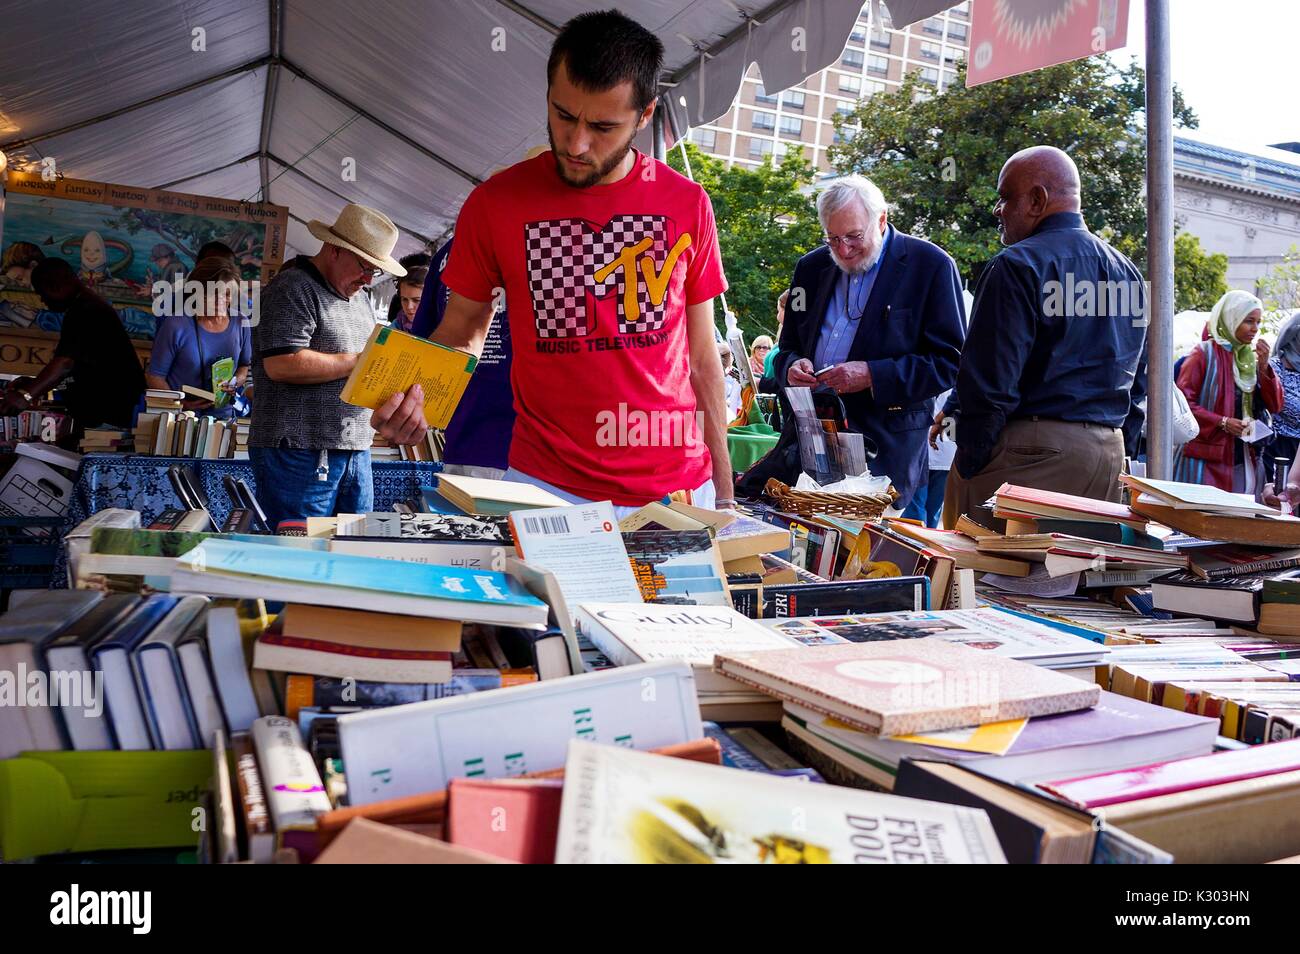 A young man wearing a MTV t-shirt exploring a large pile of books among other people exploring books at a tent at the Baltimore Book Festival, Baltimore, Maryland, September, 2013. Stock Photo